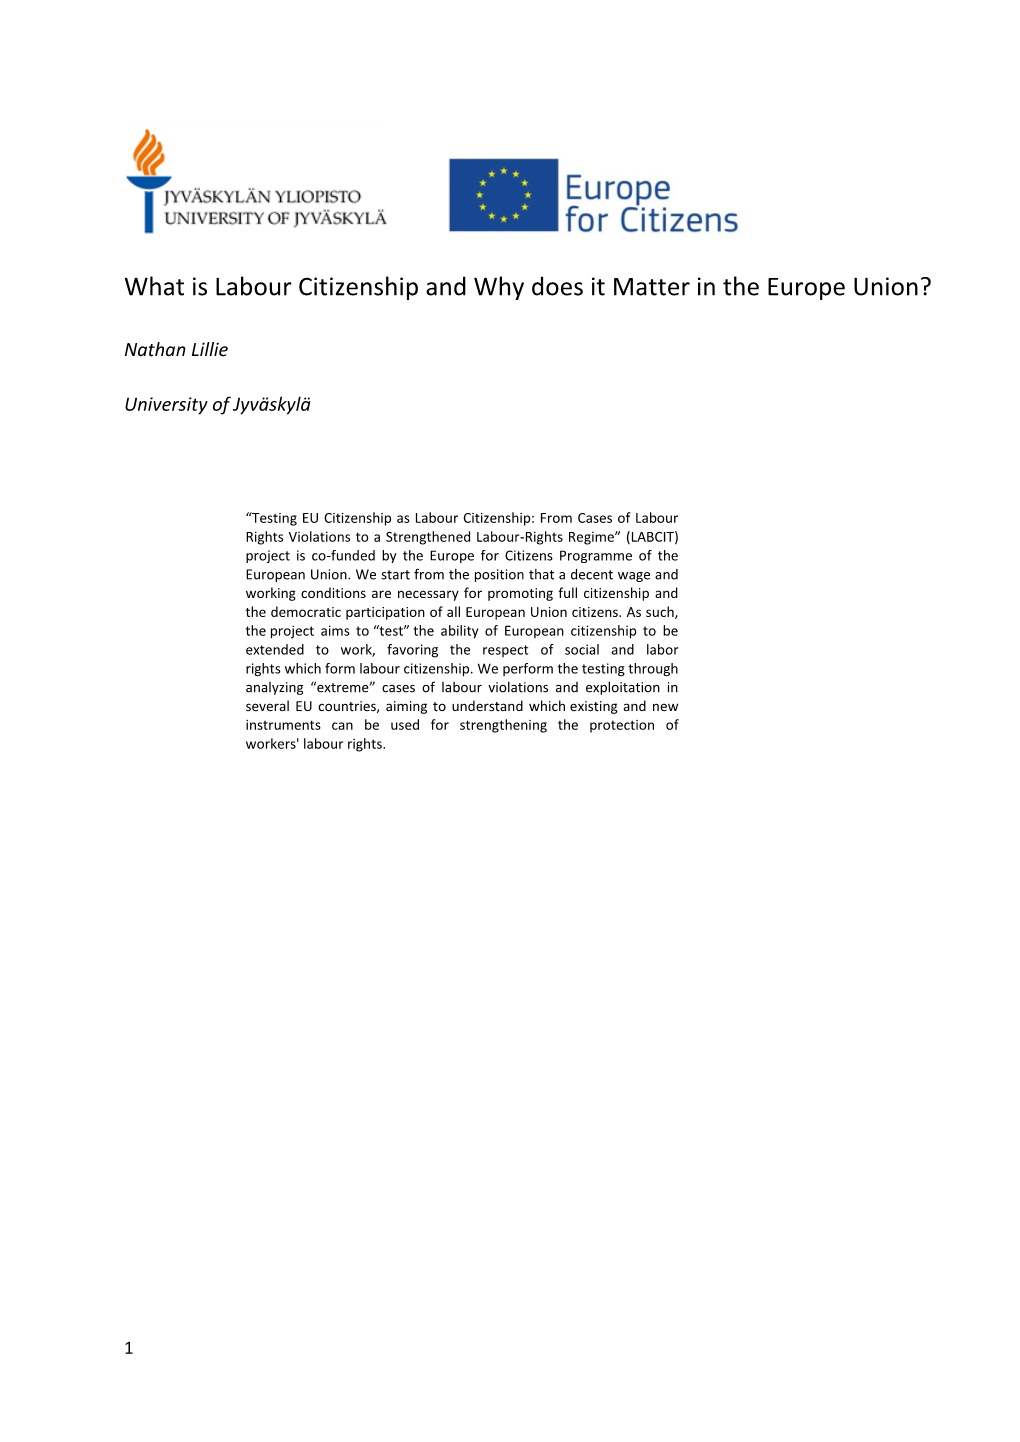 What Is Labour Citizenship and Why Does It Matter in the Europe Union?